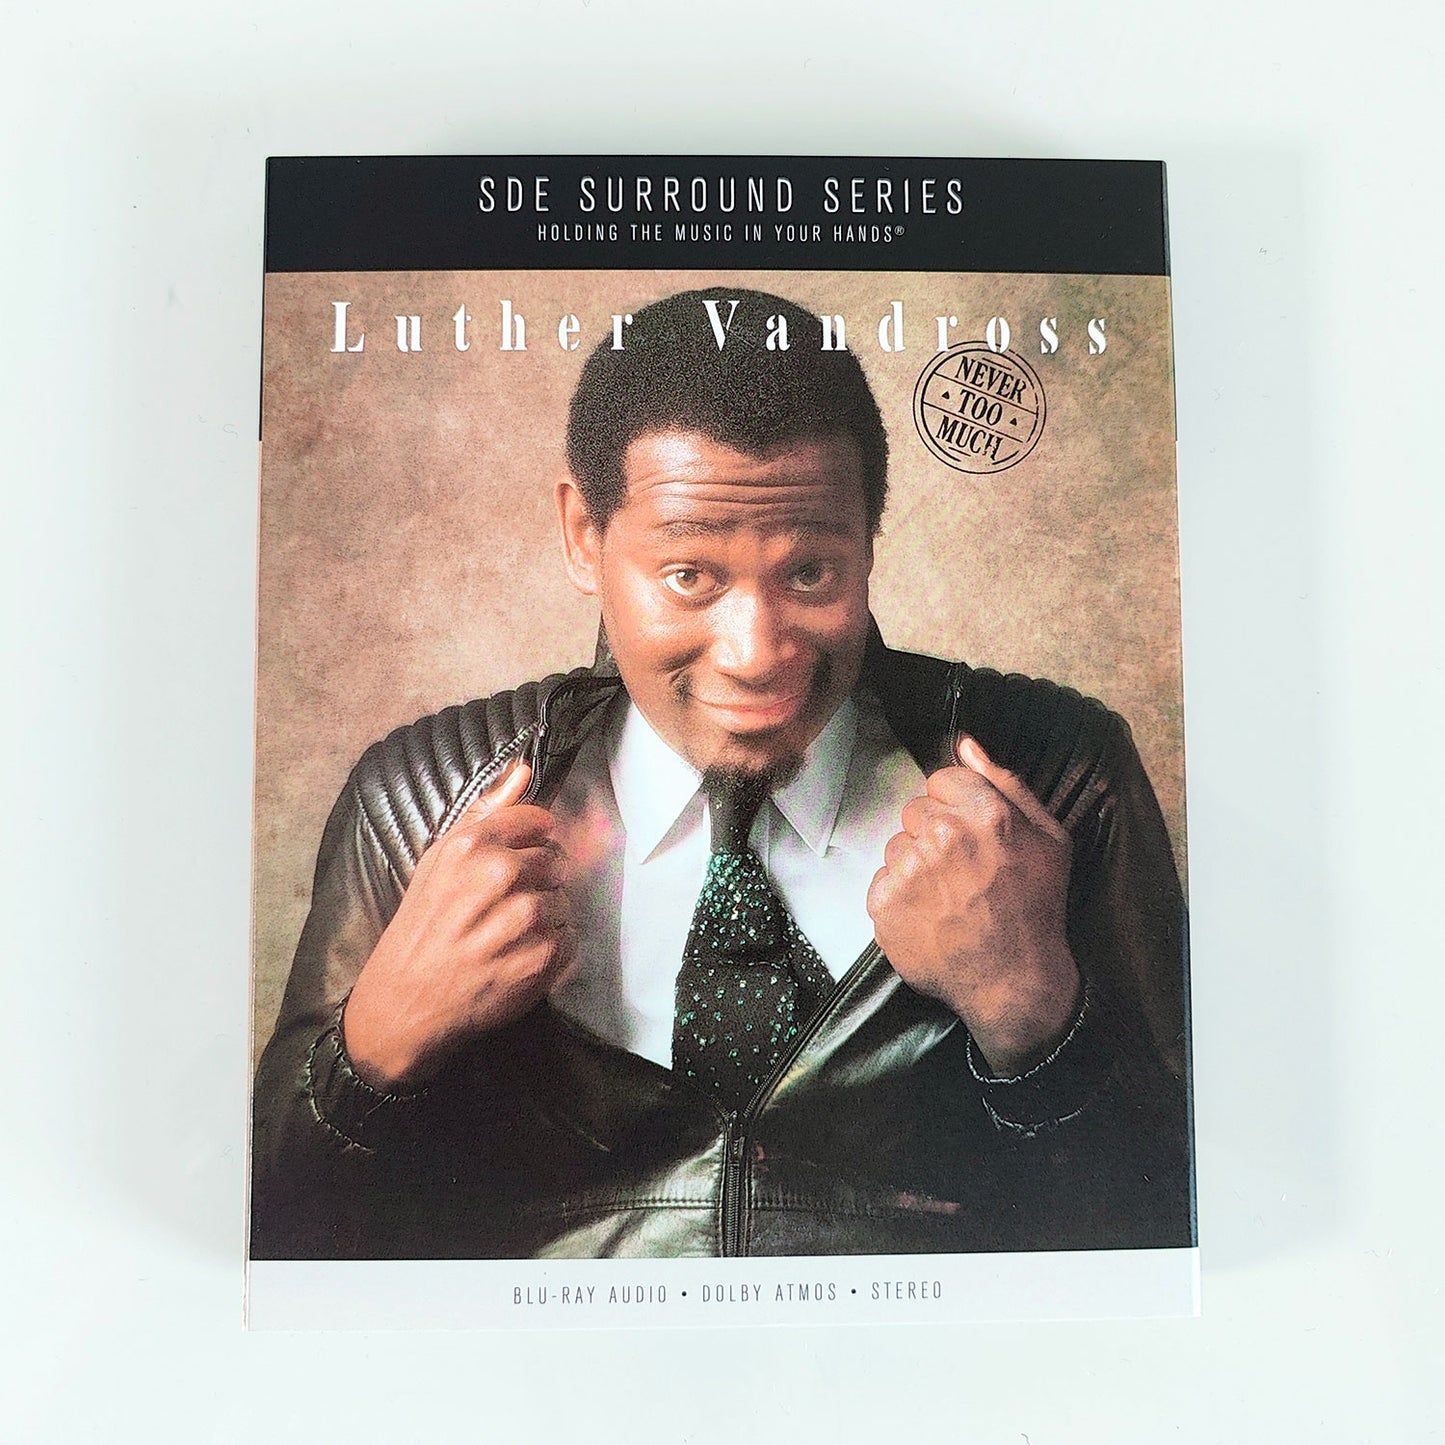 Luther Vandross / Never Too Much exclusive blu-ray audio with Dolby Atmos Mix